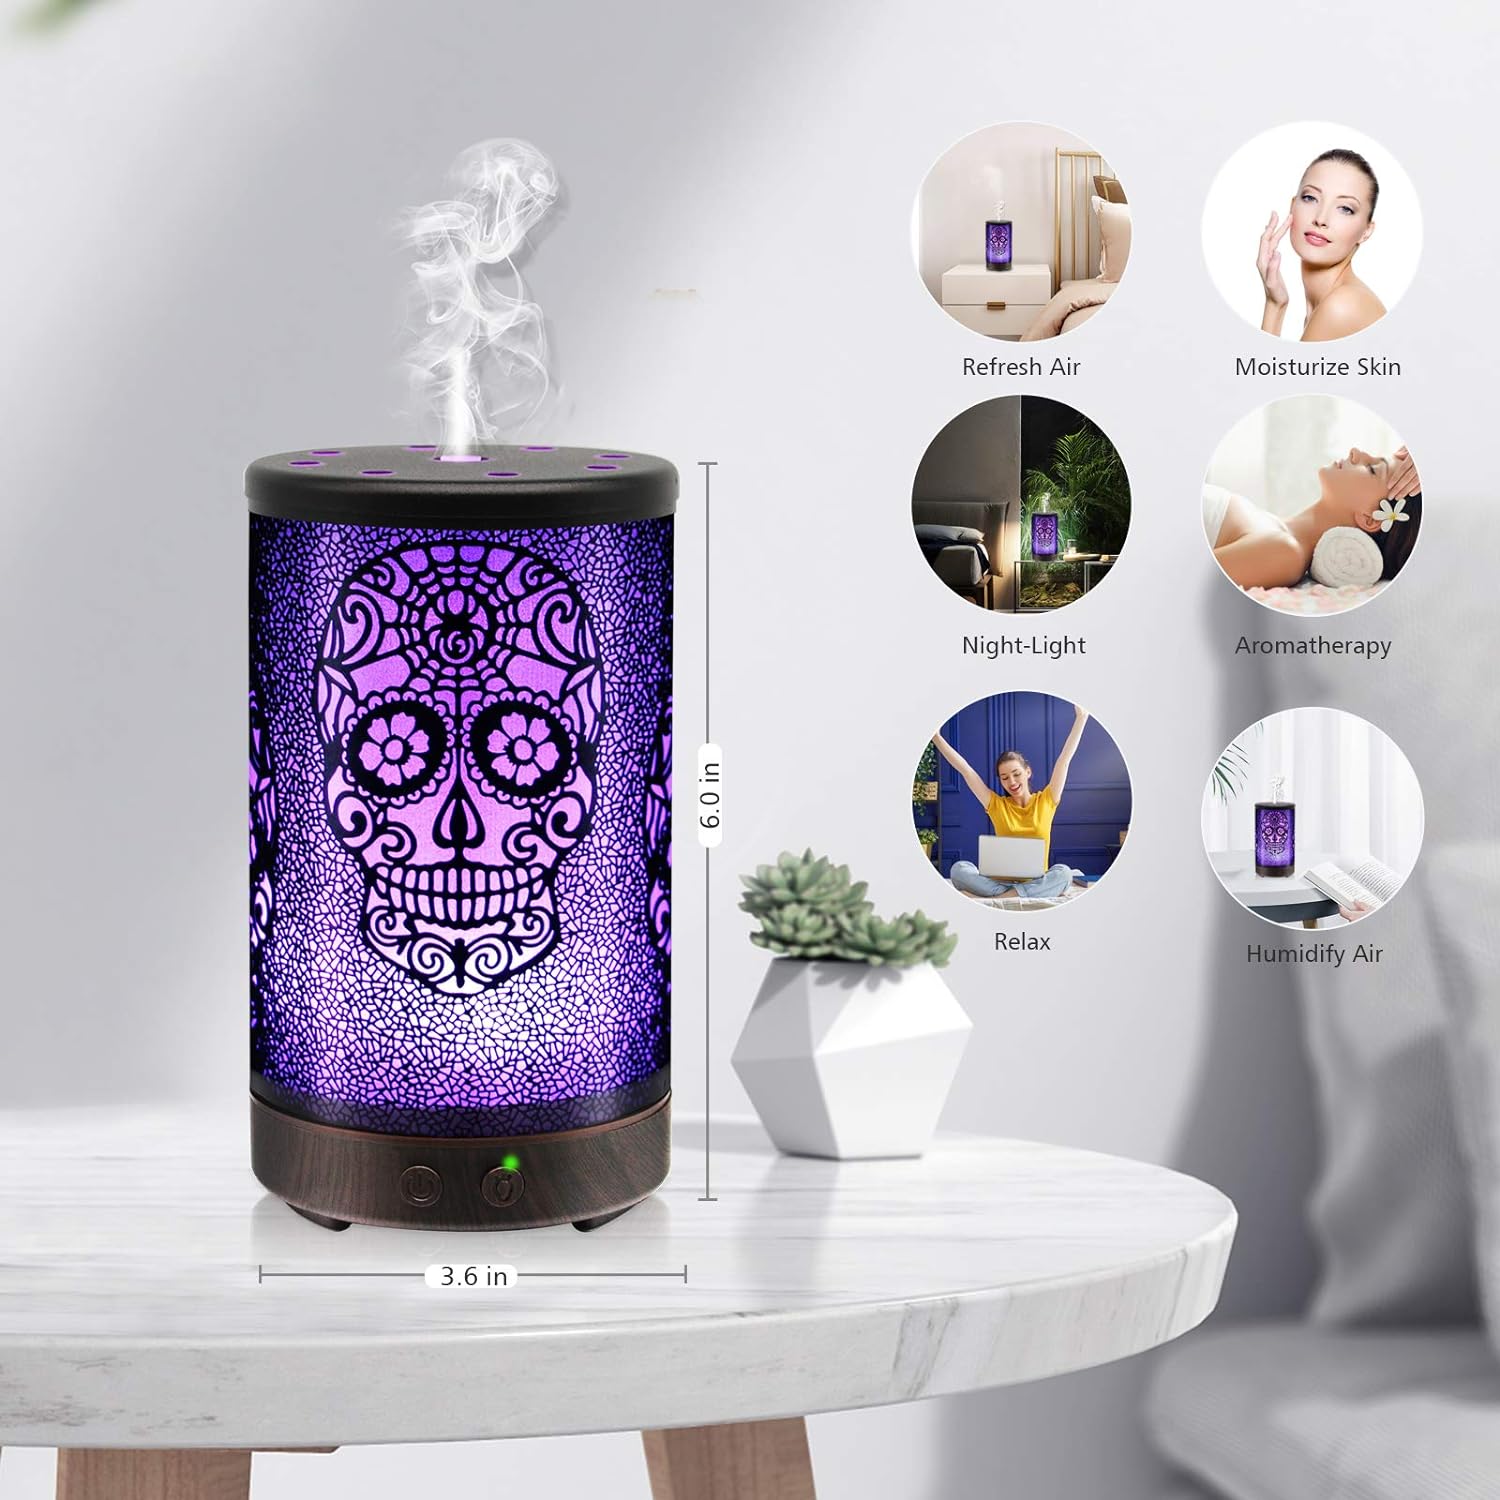 Skull Essential Oil Diffuser, Daroma 100ml Metal Aromatherapy Ultrasonic Cool Mist Humidifier Air Scent Home Office Gift, Waterless Auto-Off